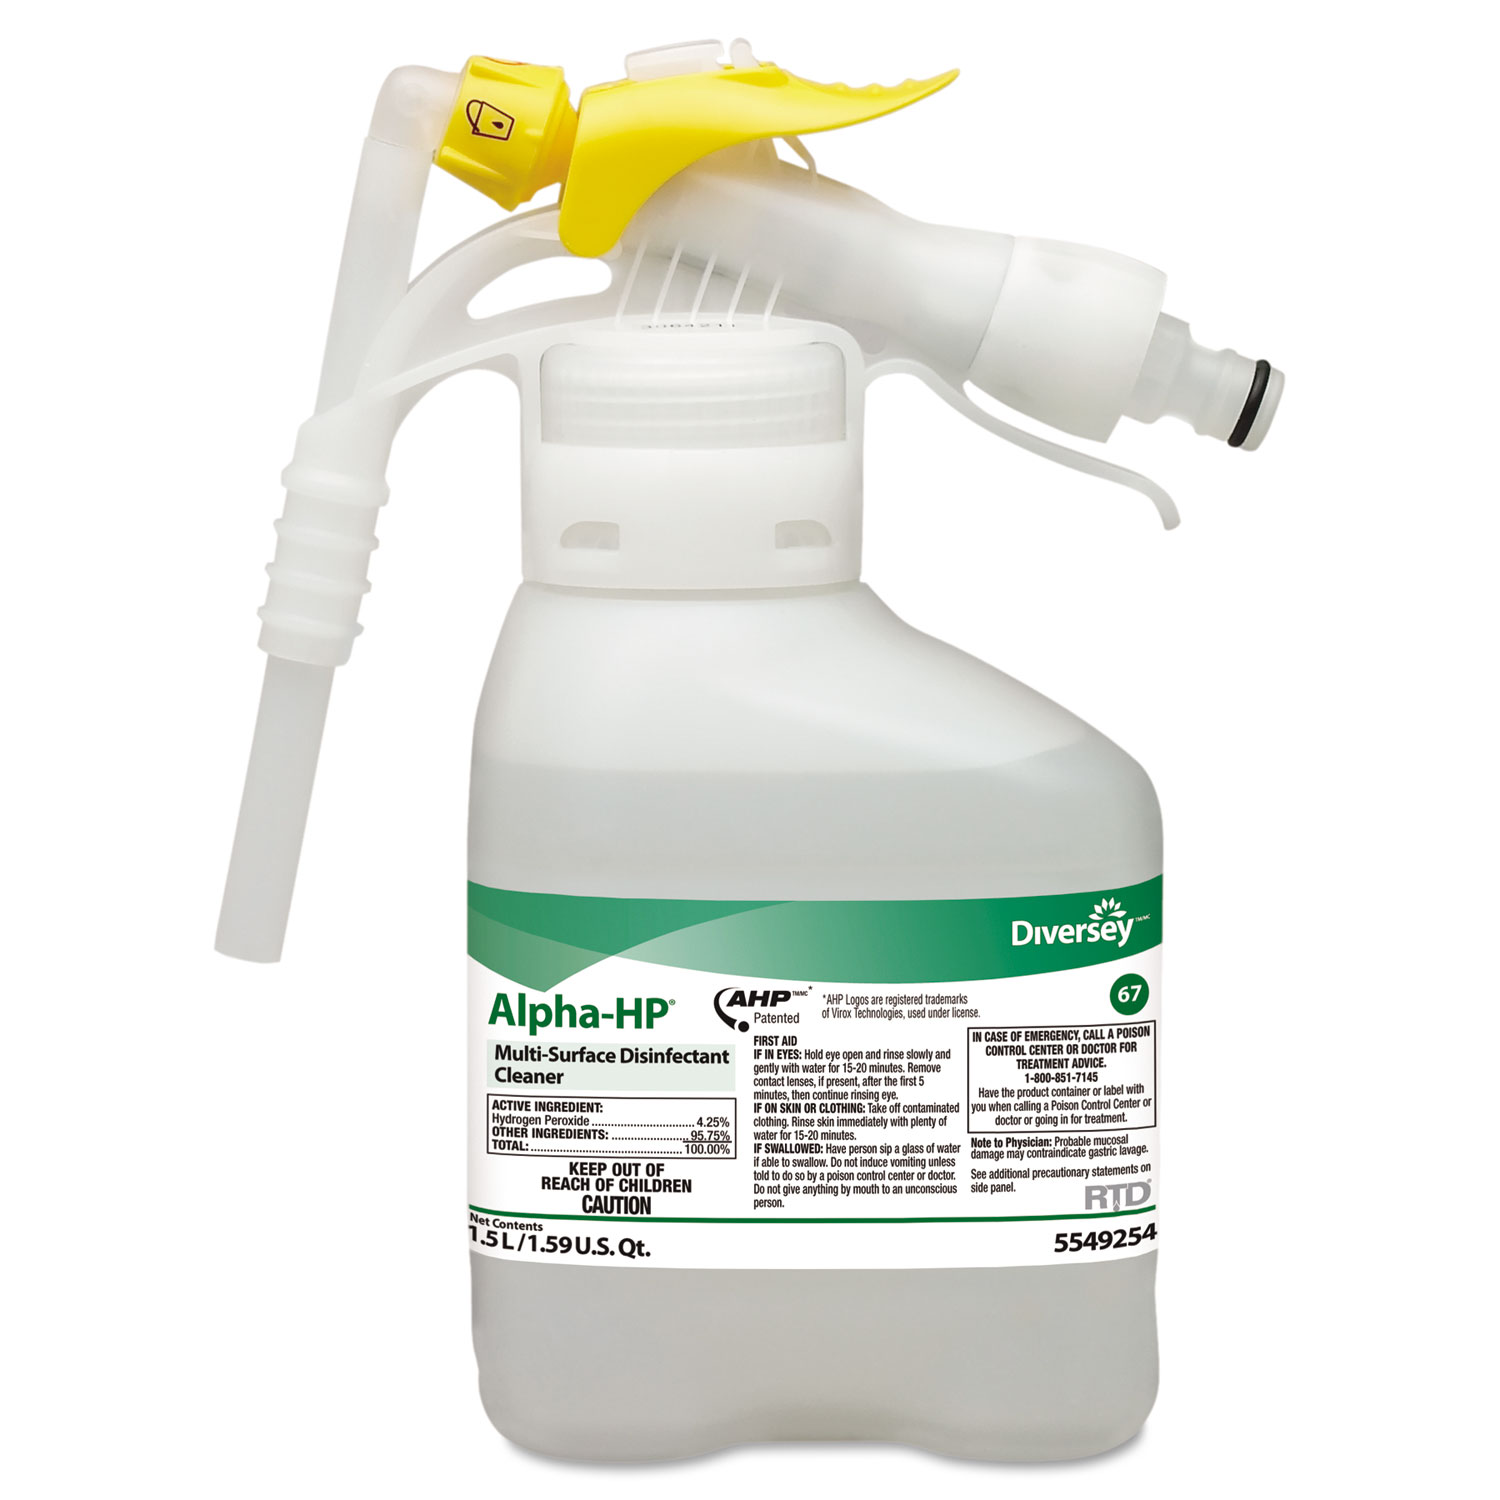 Alpha-HP Multi-Surface Disinfectant Cleaner, Citrus Scent, 1.5L Spray Bottle UOM